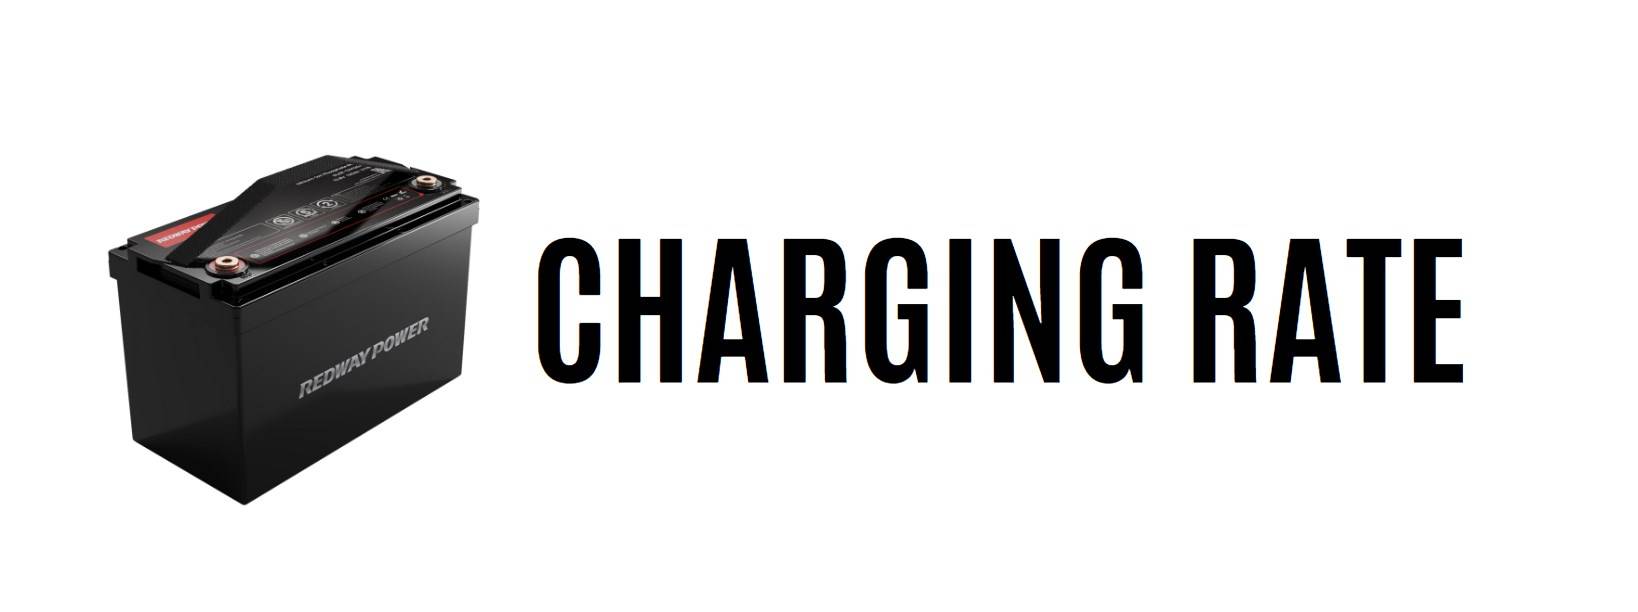 what is charging rate